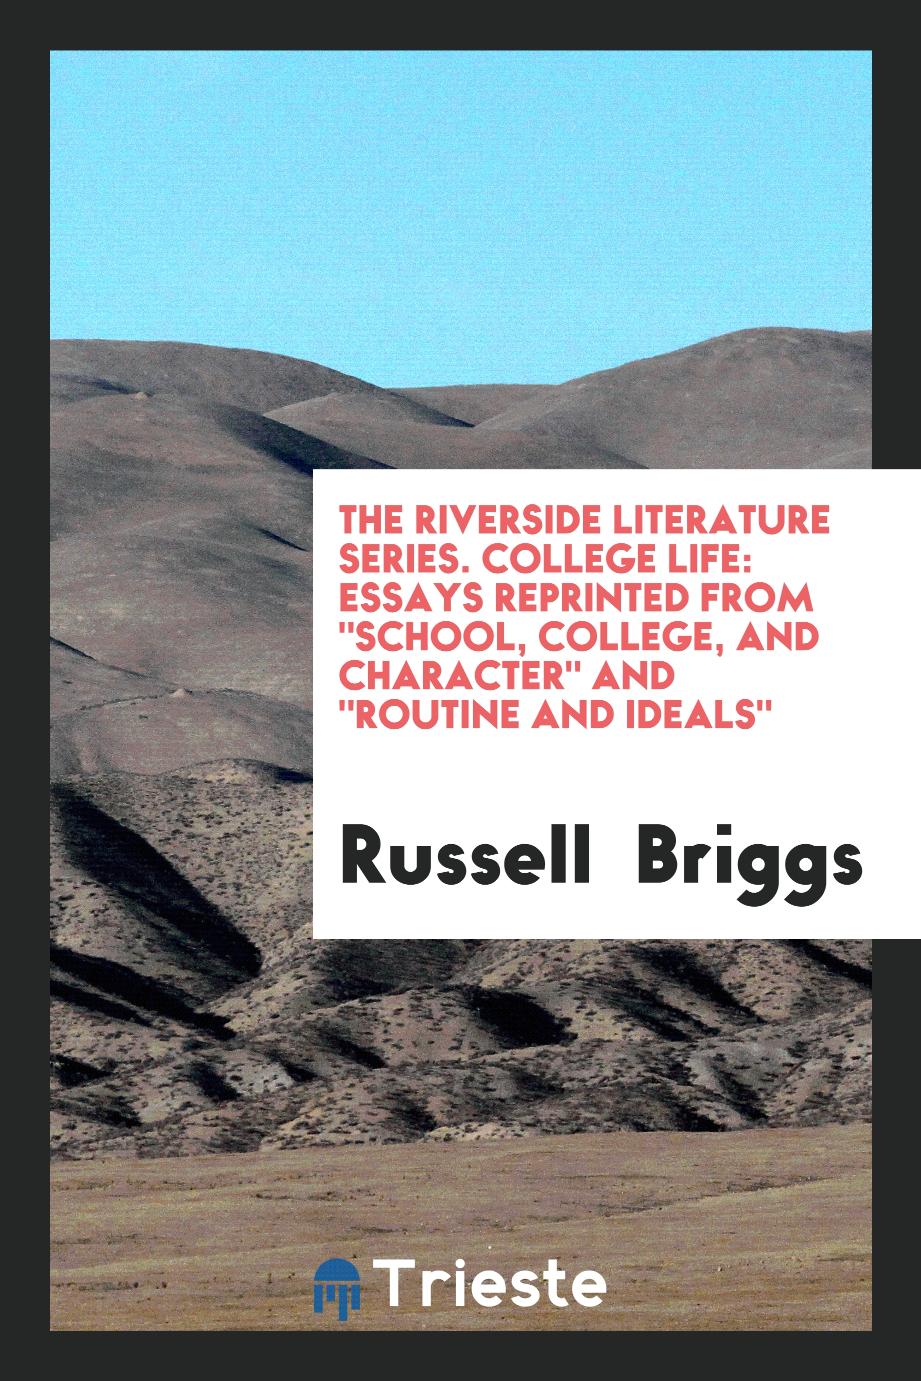 The Riverside Literature Series. College Life: Essays Reprinted From "School, College, and Character" And "Routine and Ideals"